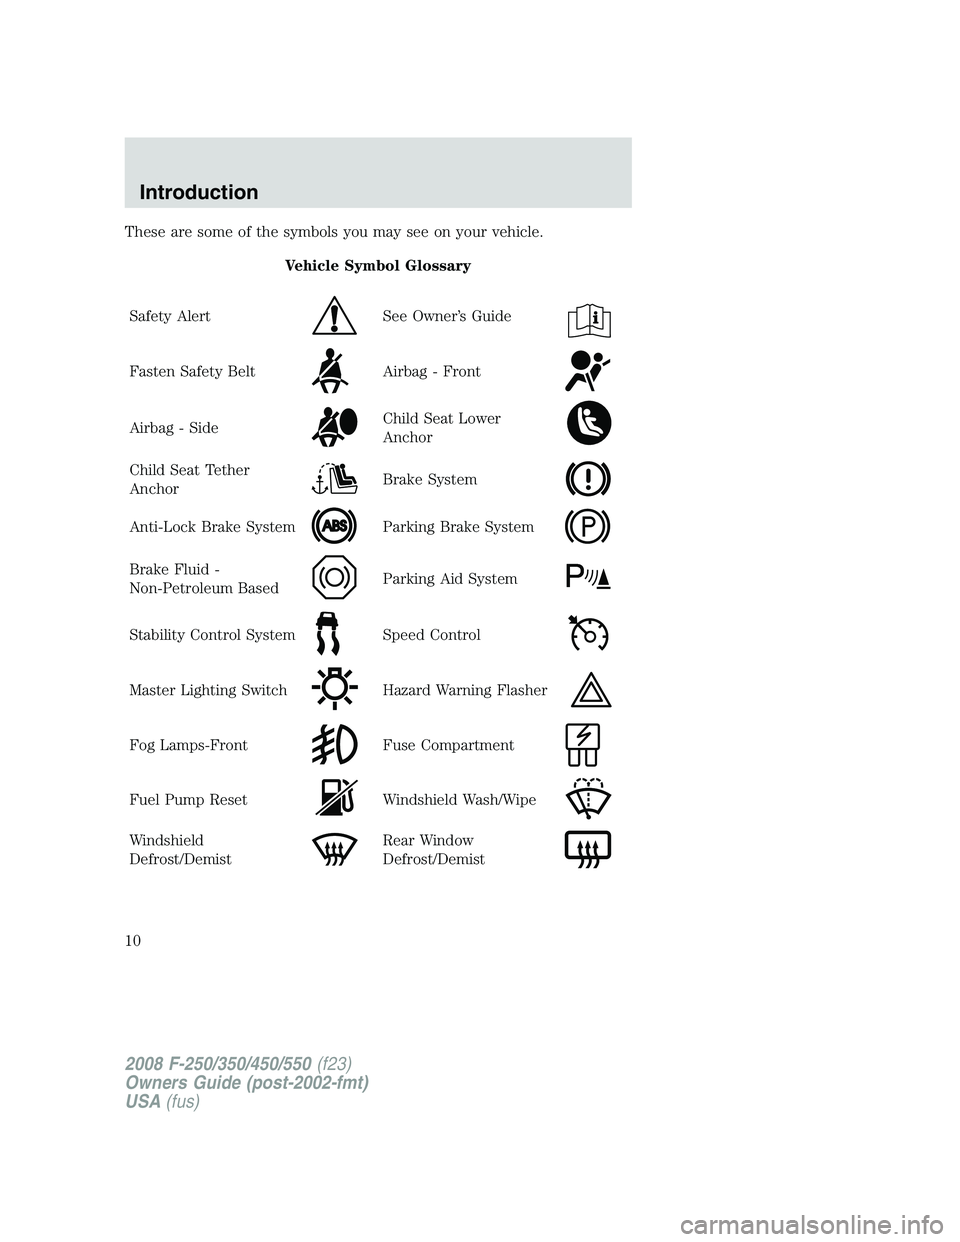 FORD F250 2008  Owners Manual These are some of the symbols you may see on your vehicle.
Vehicle Symbol Glossary
Safety Alert
See Owner’s Guide
Fasten Safety BeltAirbag - Front
Airbag - SideChild Seat Lower
Anchor
Child Seat Tet